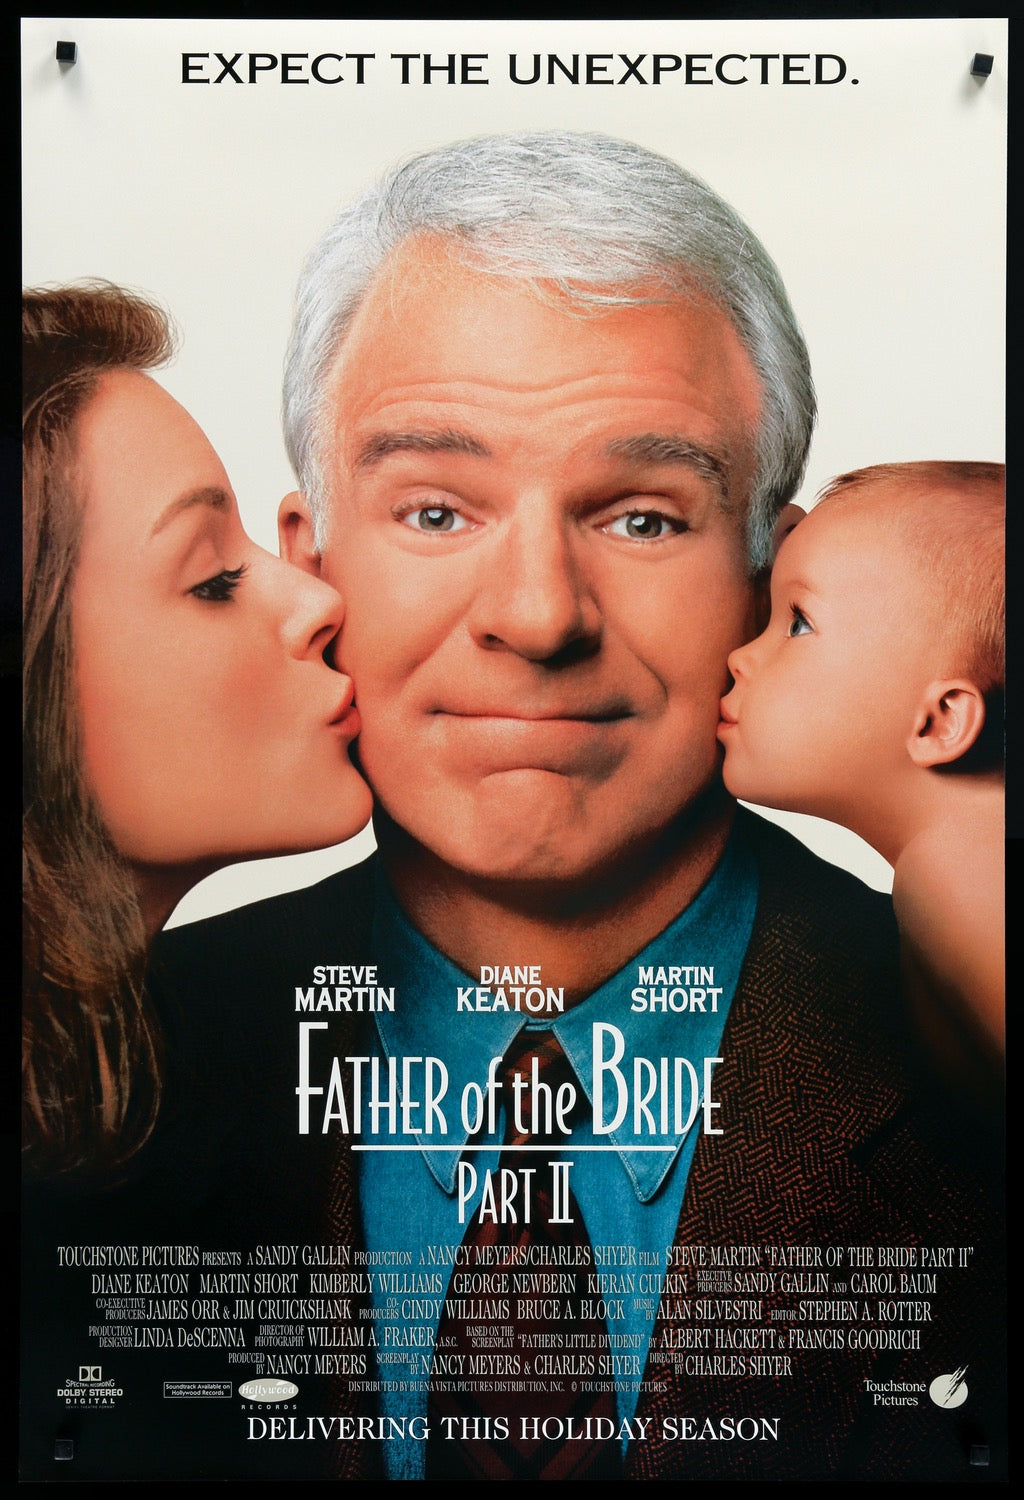 Father of the Bride Part II (1995) original movie poster for sale at Original Film Art